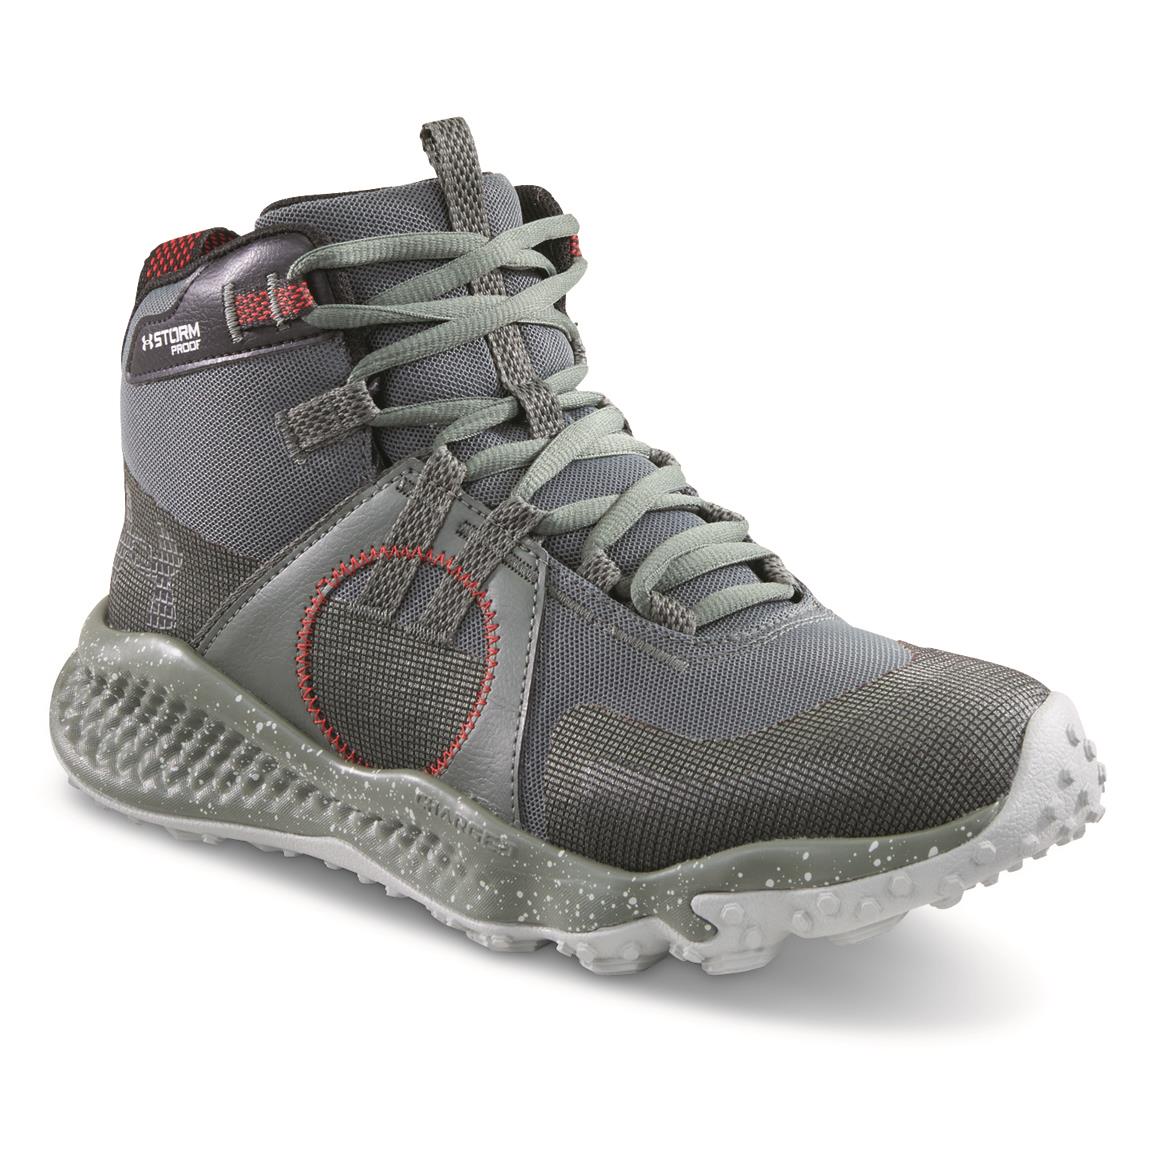 Under Armour Men's Charged Maven Trek Waterproof Mid Hiking Shoes, Colorado Sage/olive Tint/black